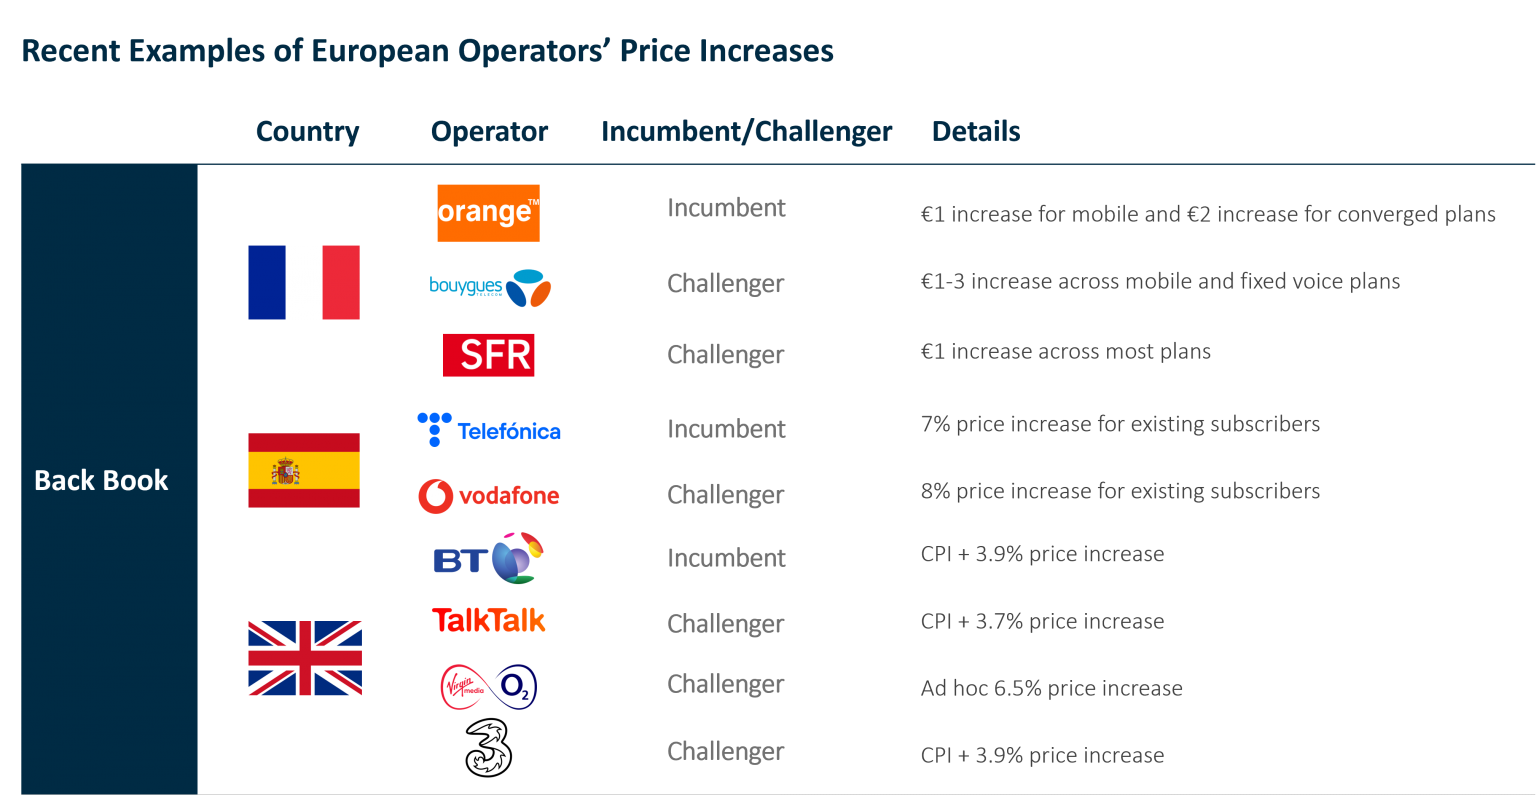 Chart showing Recent examples of European Operators' Price Increases